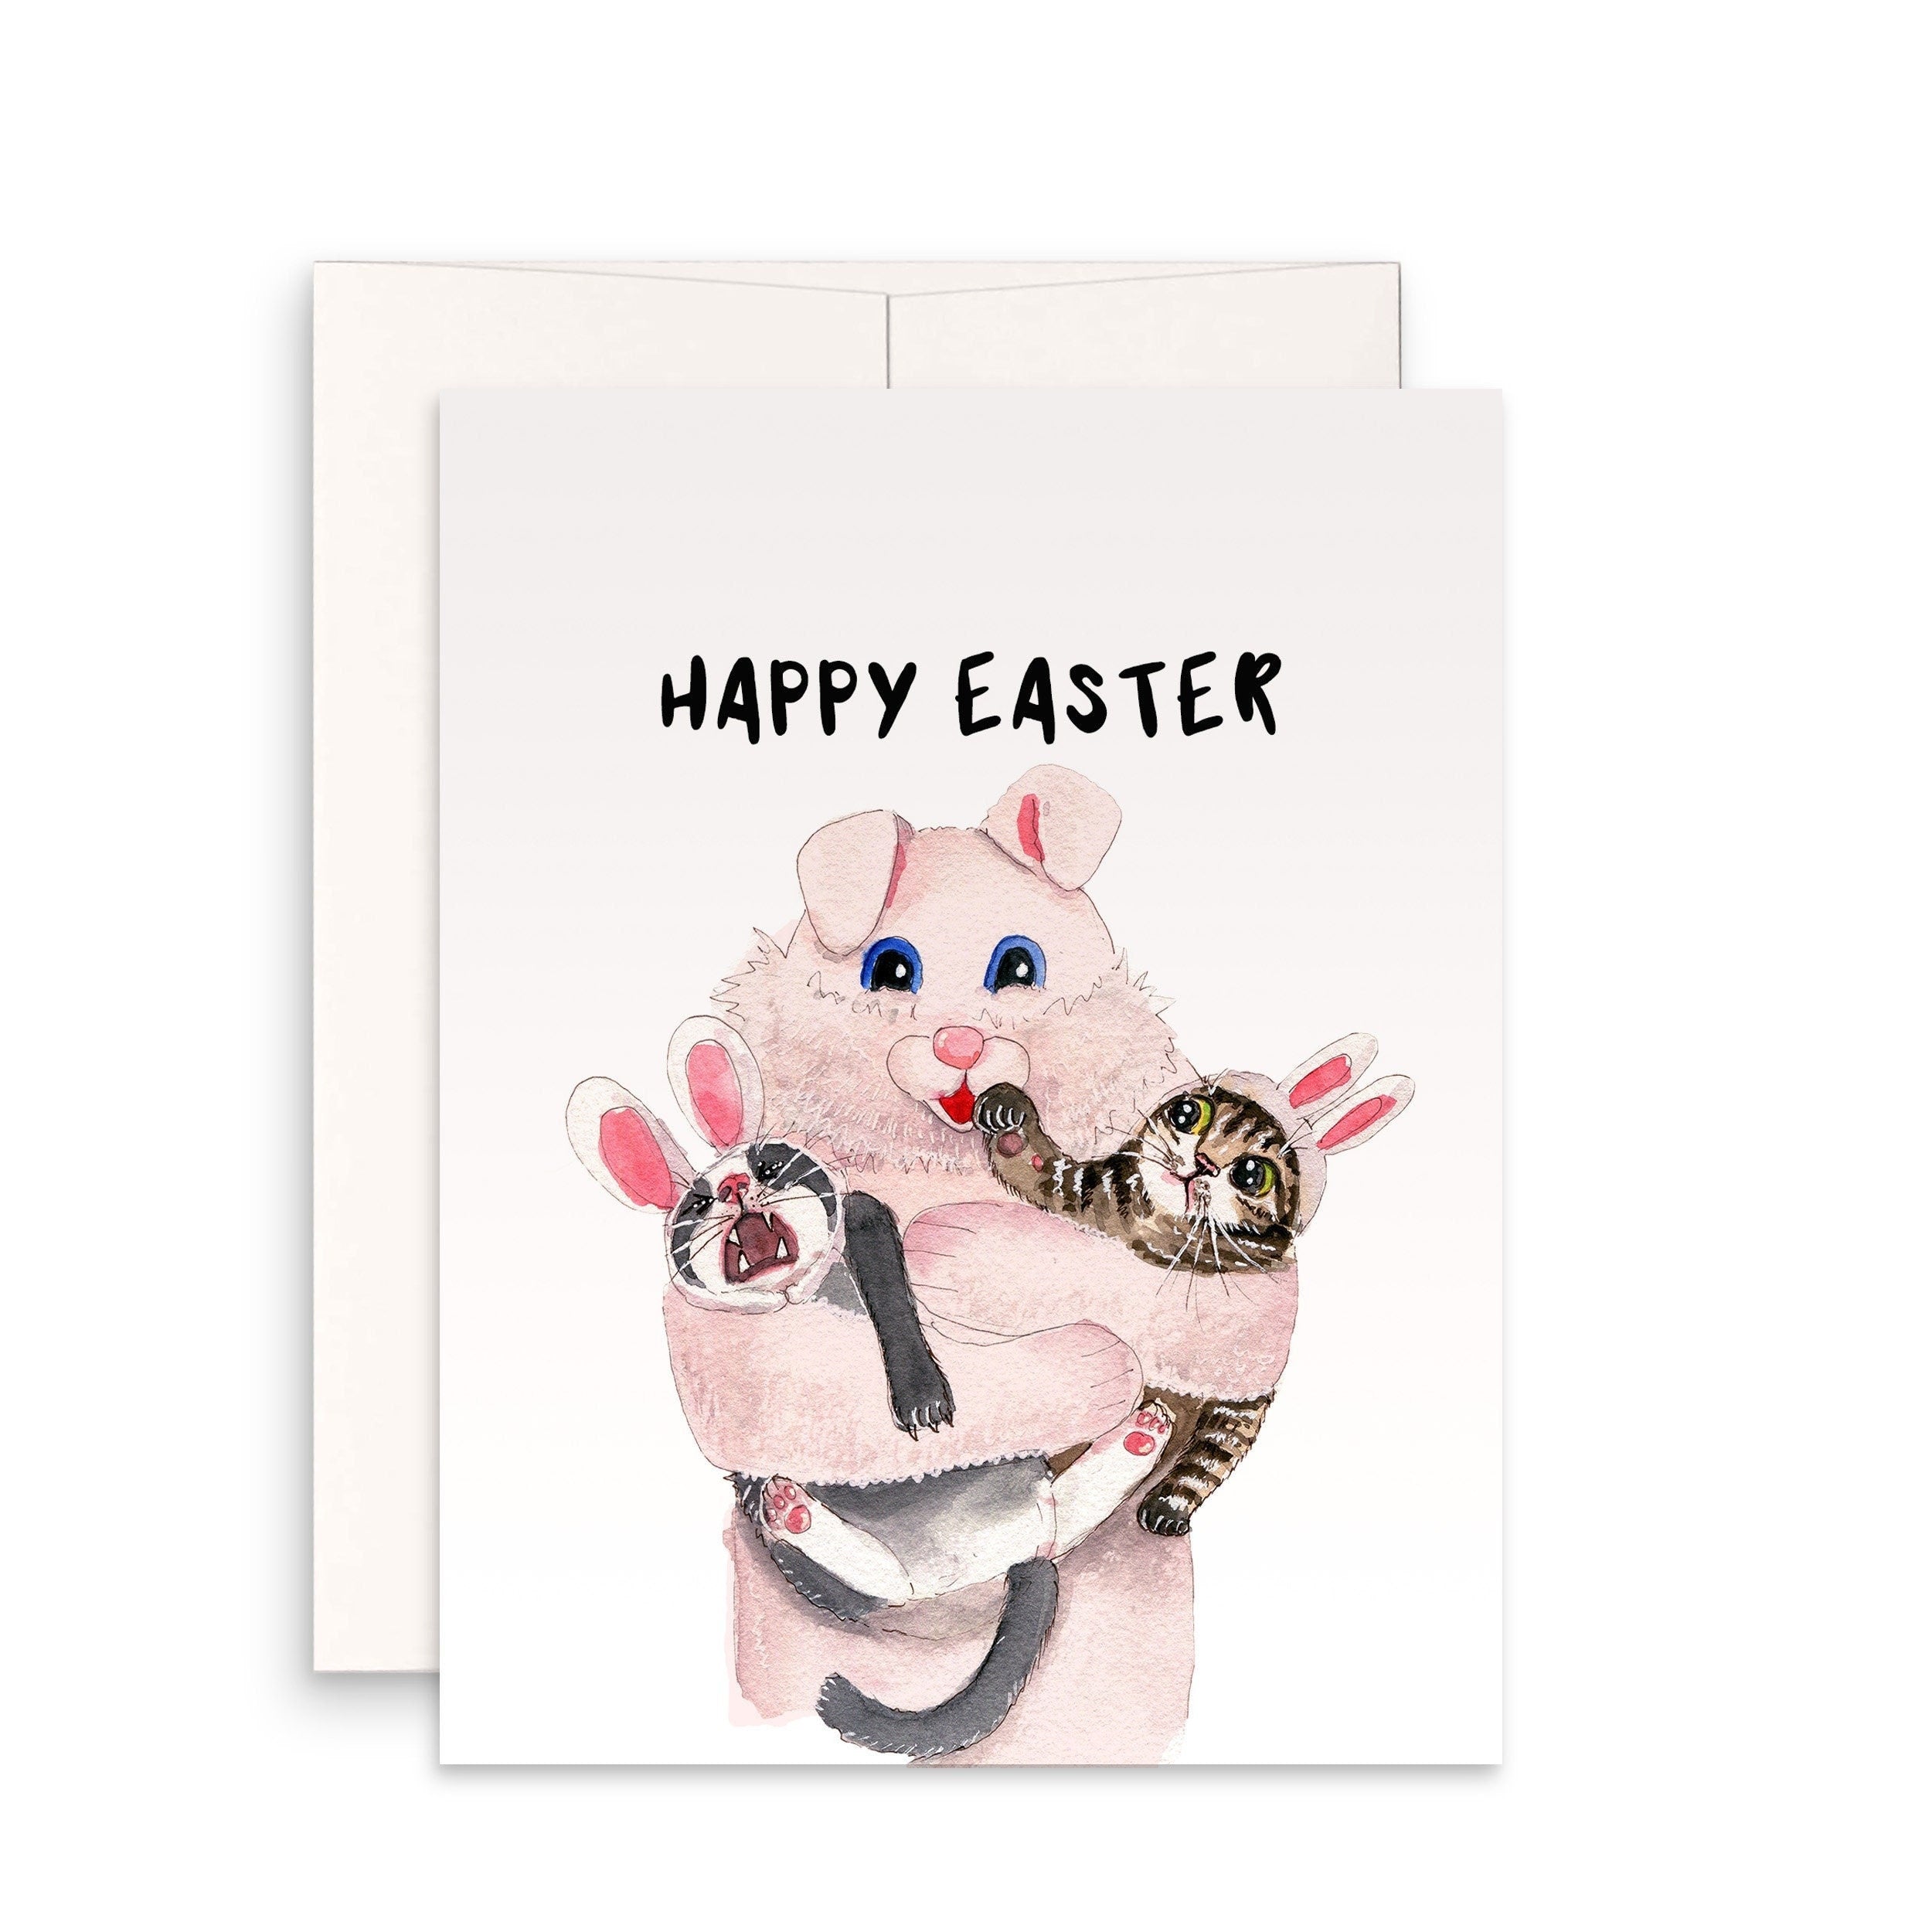 Funny Best Fishes for a Happy Easter 3D Stand up Bunny Fish Greeting Card, Funny  Easter Gift, Gift for Friends, Family and Coworkers 